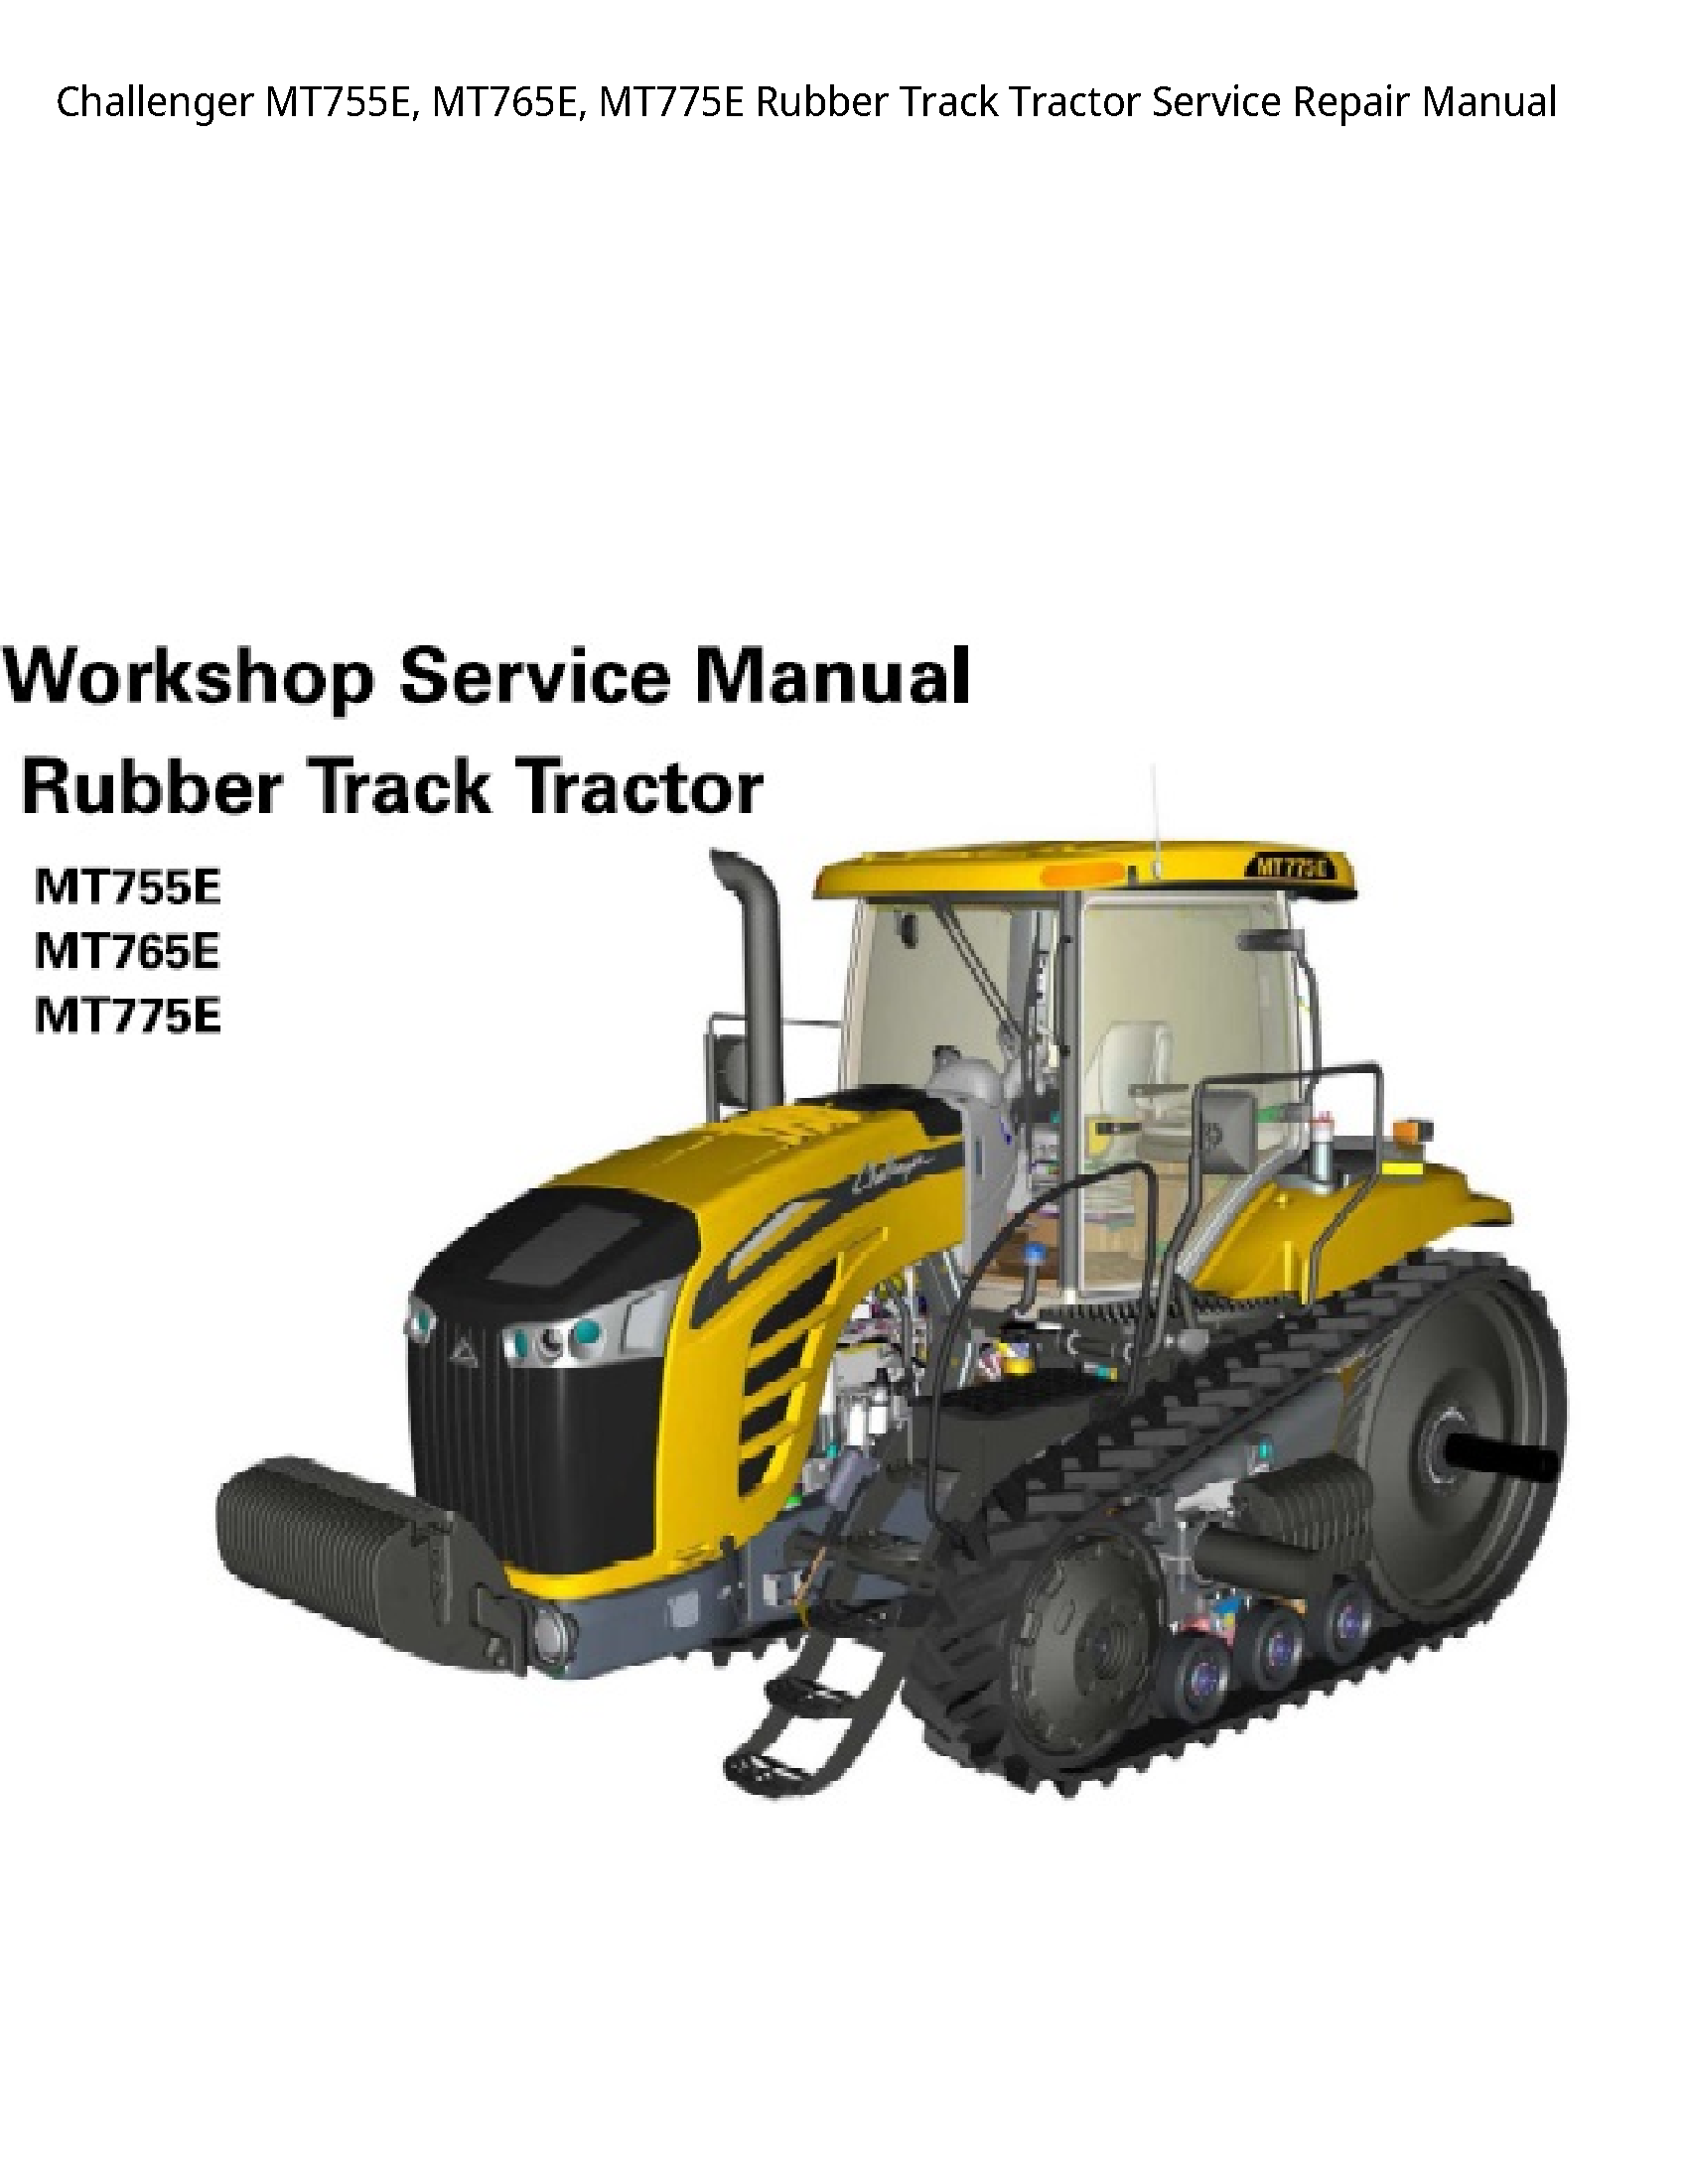 Challenger MT755E Rubber Track Tractor manual